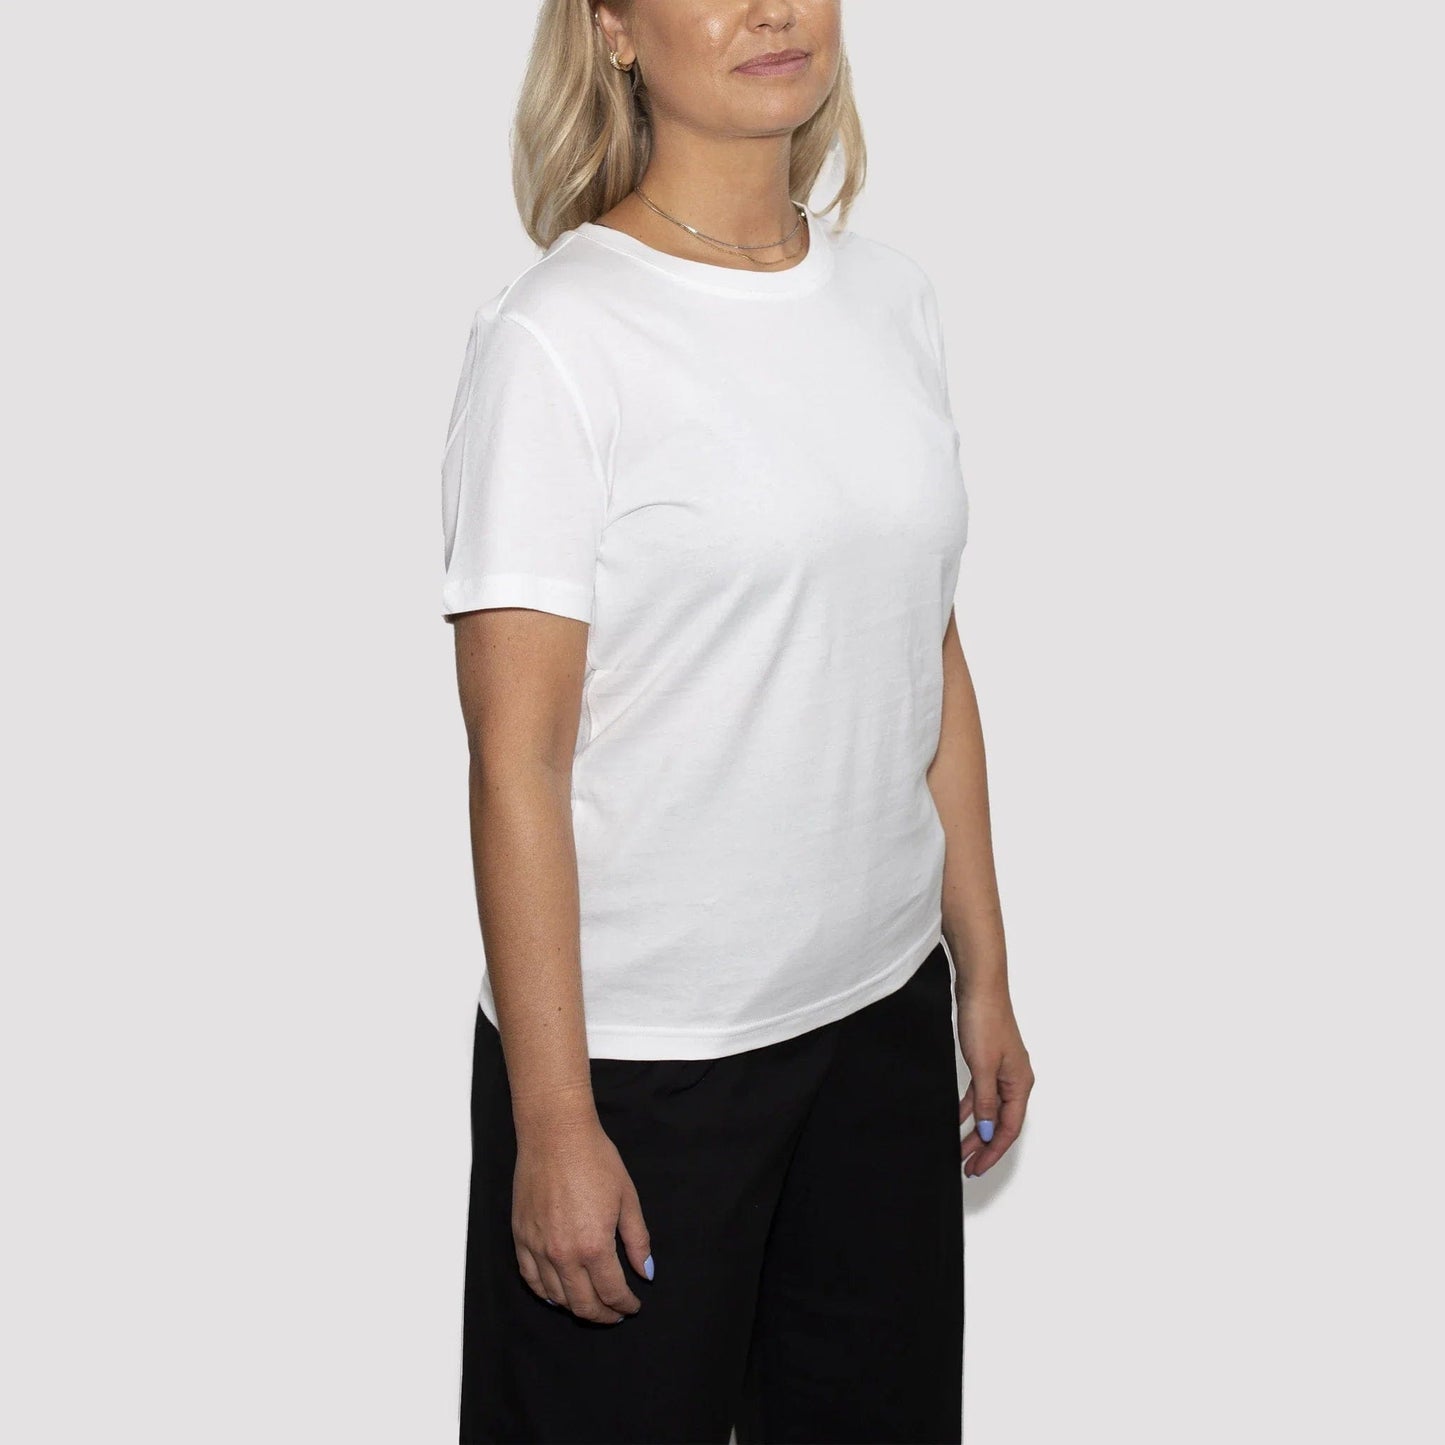 Women’s Recycled Cotton T-Shirt, White